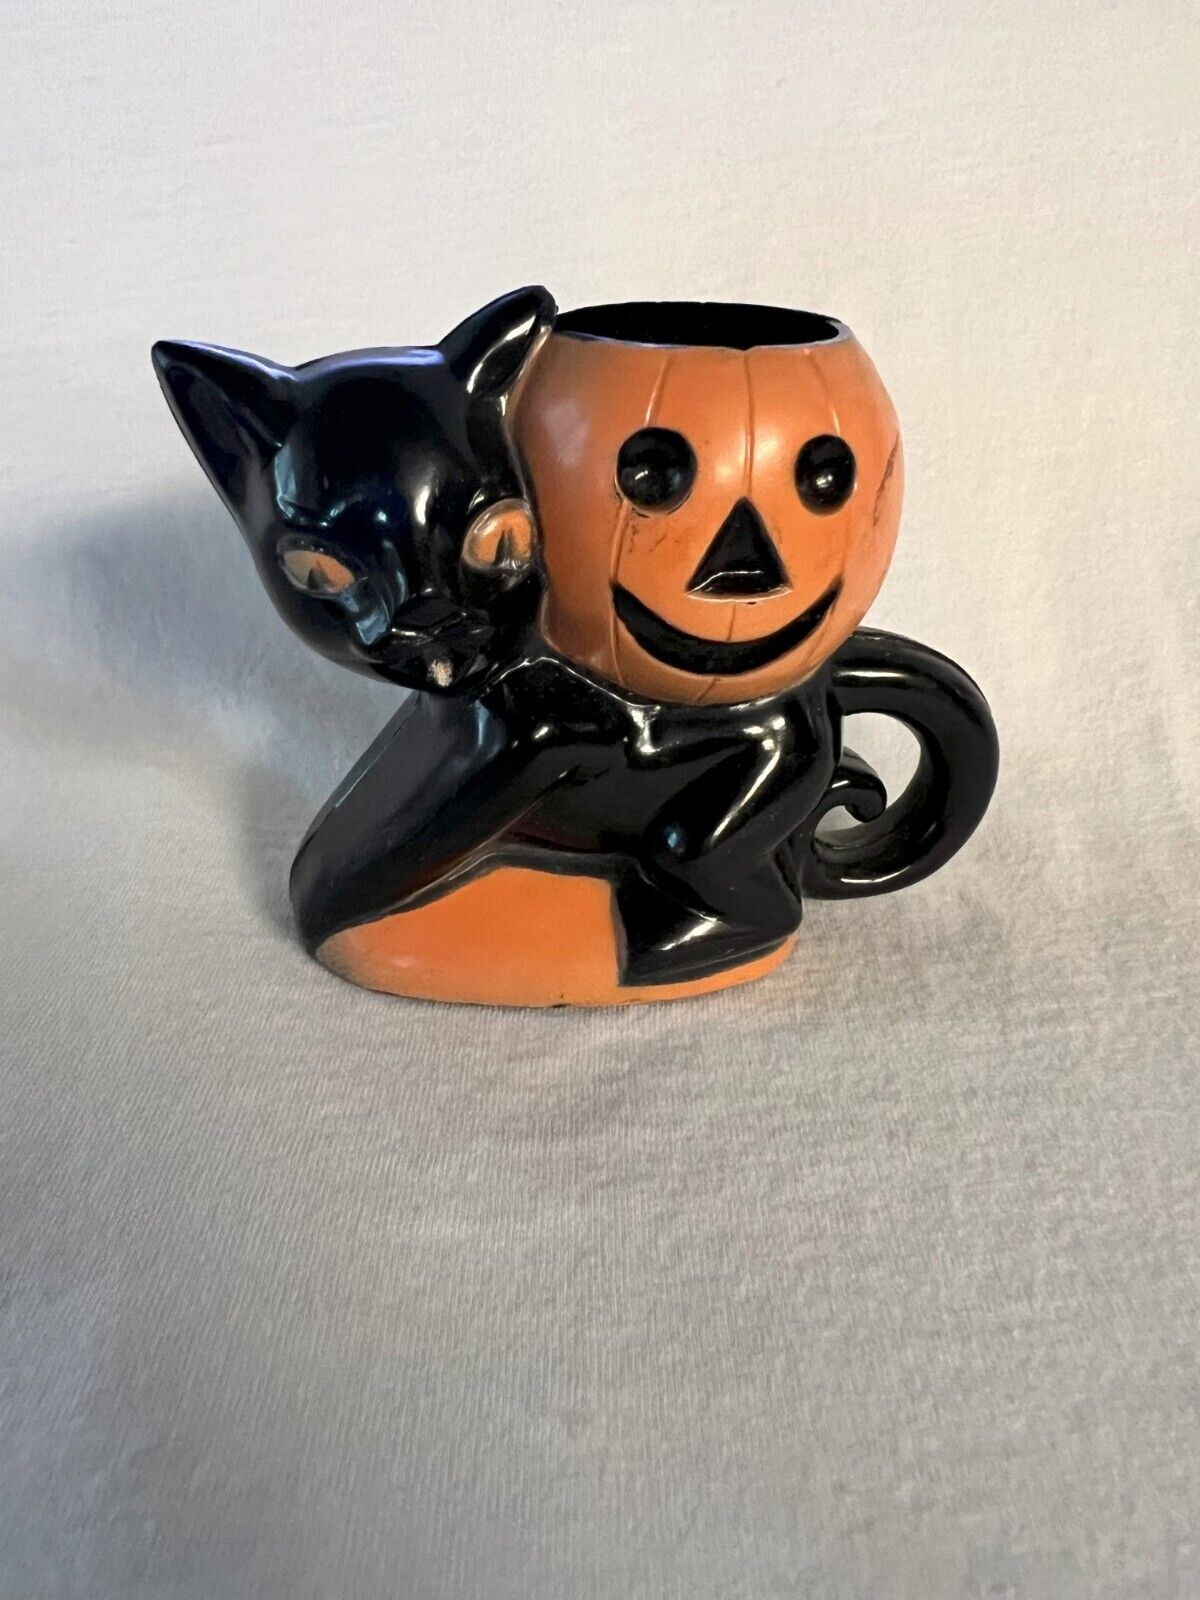 Vintage Halloween 1950s Rosbro Plastic Black Cat And Pumpkin Candy Container